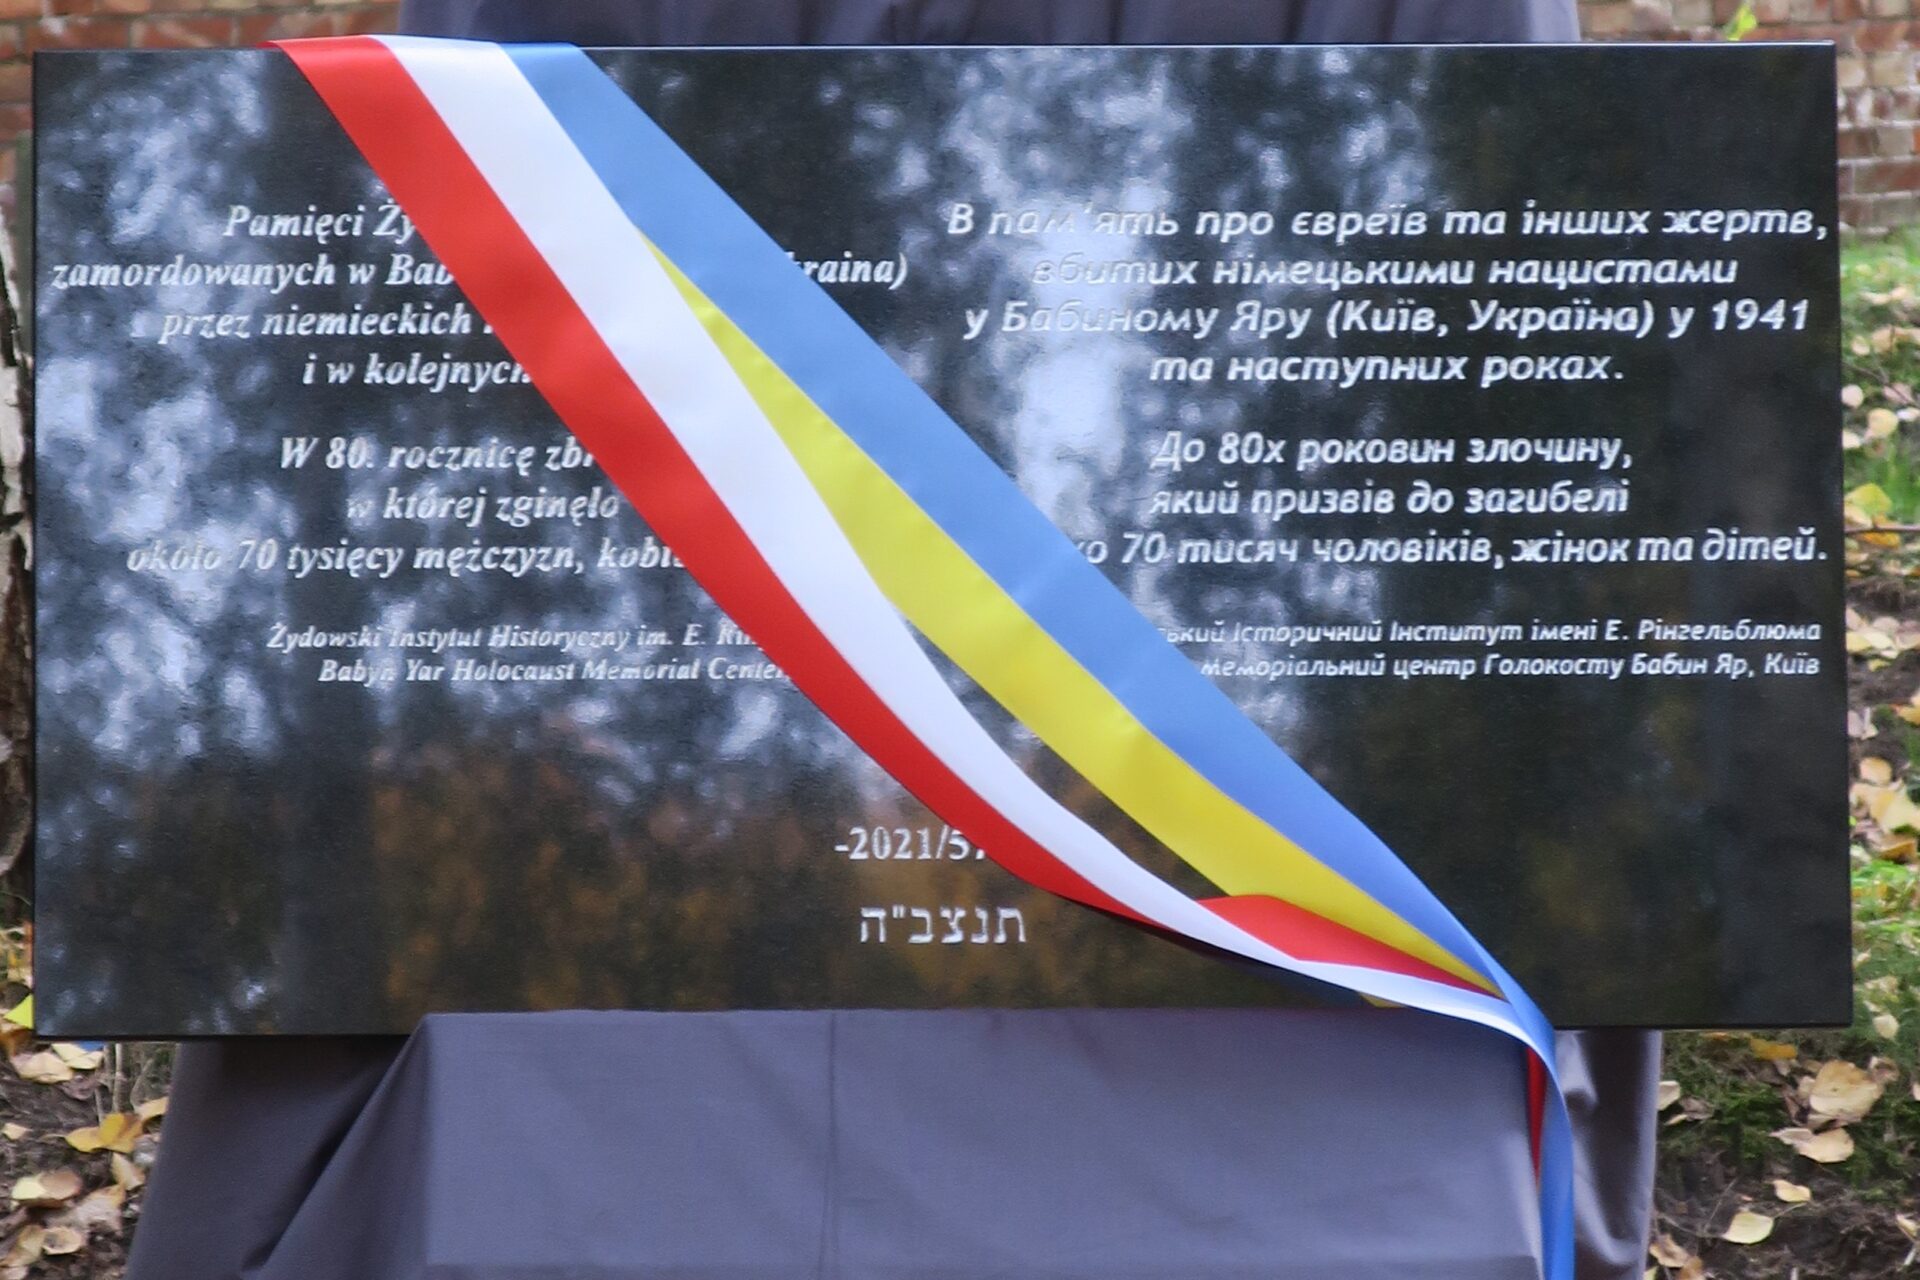 The Unveiling of the Memorial Plaque for the Victims of the Events in Babi Yar - Muzeum Getta Warszawskiego EN